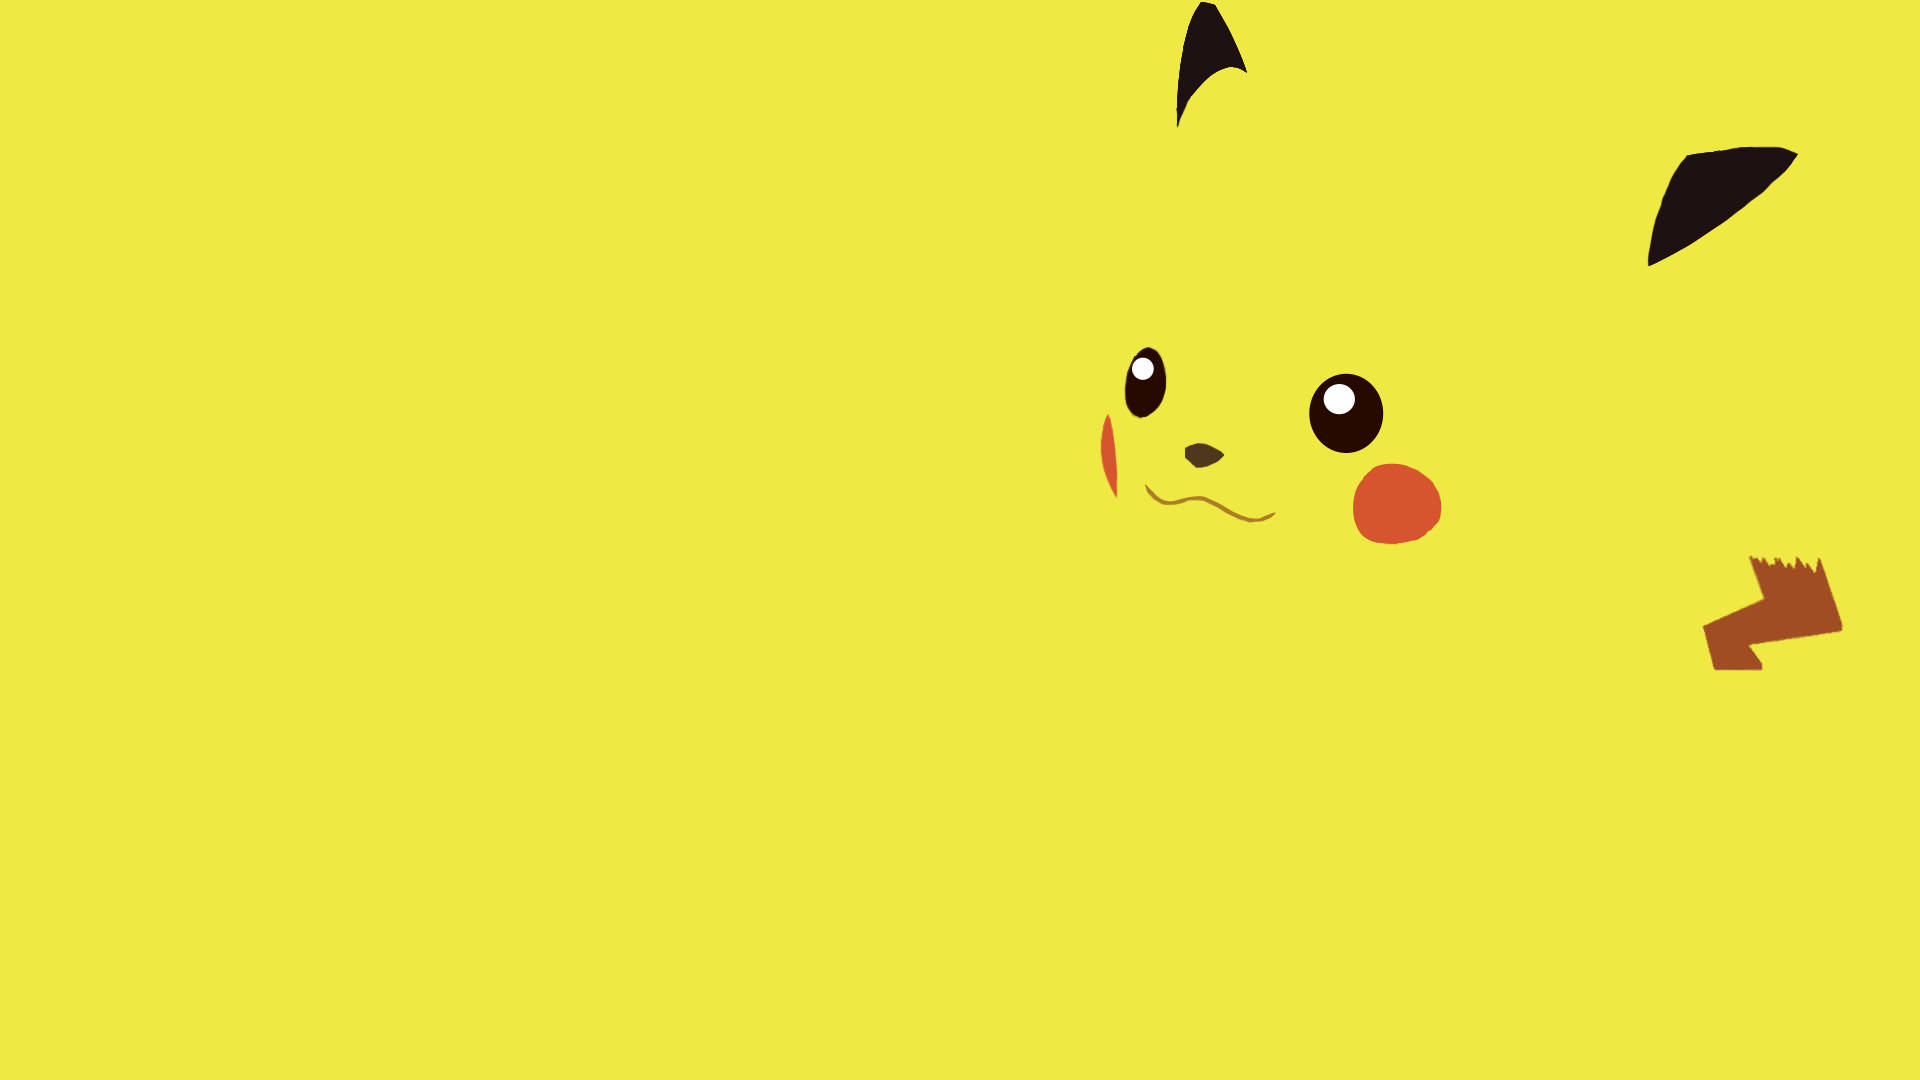 33+ Pokemon Backgrounds, Wallpapers, Images, Pictures | Design Trends